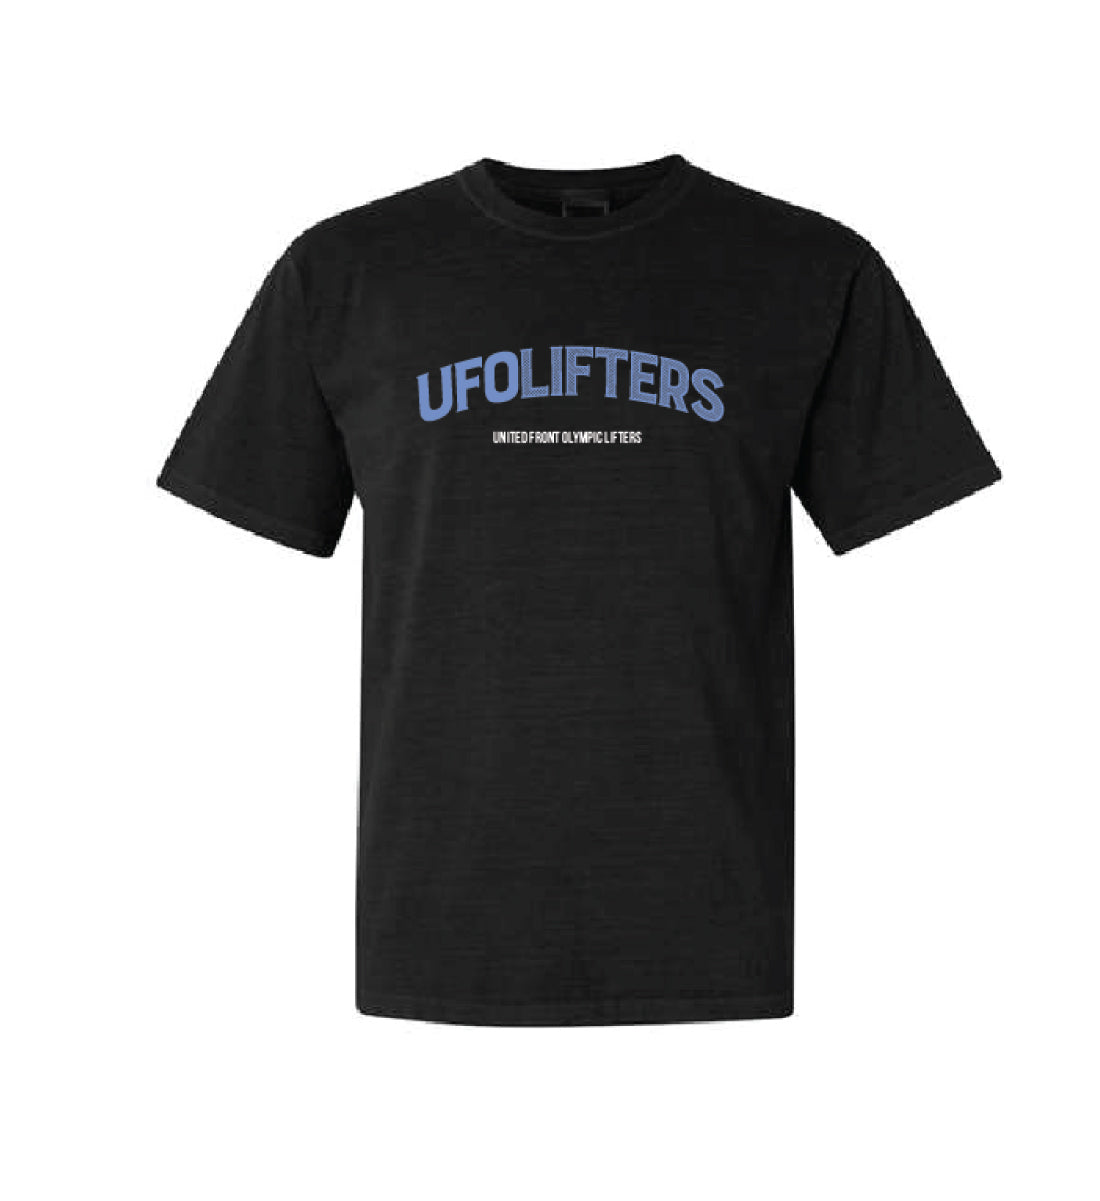 UFO Lifters Heavy blend shirt (better for oversized look)